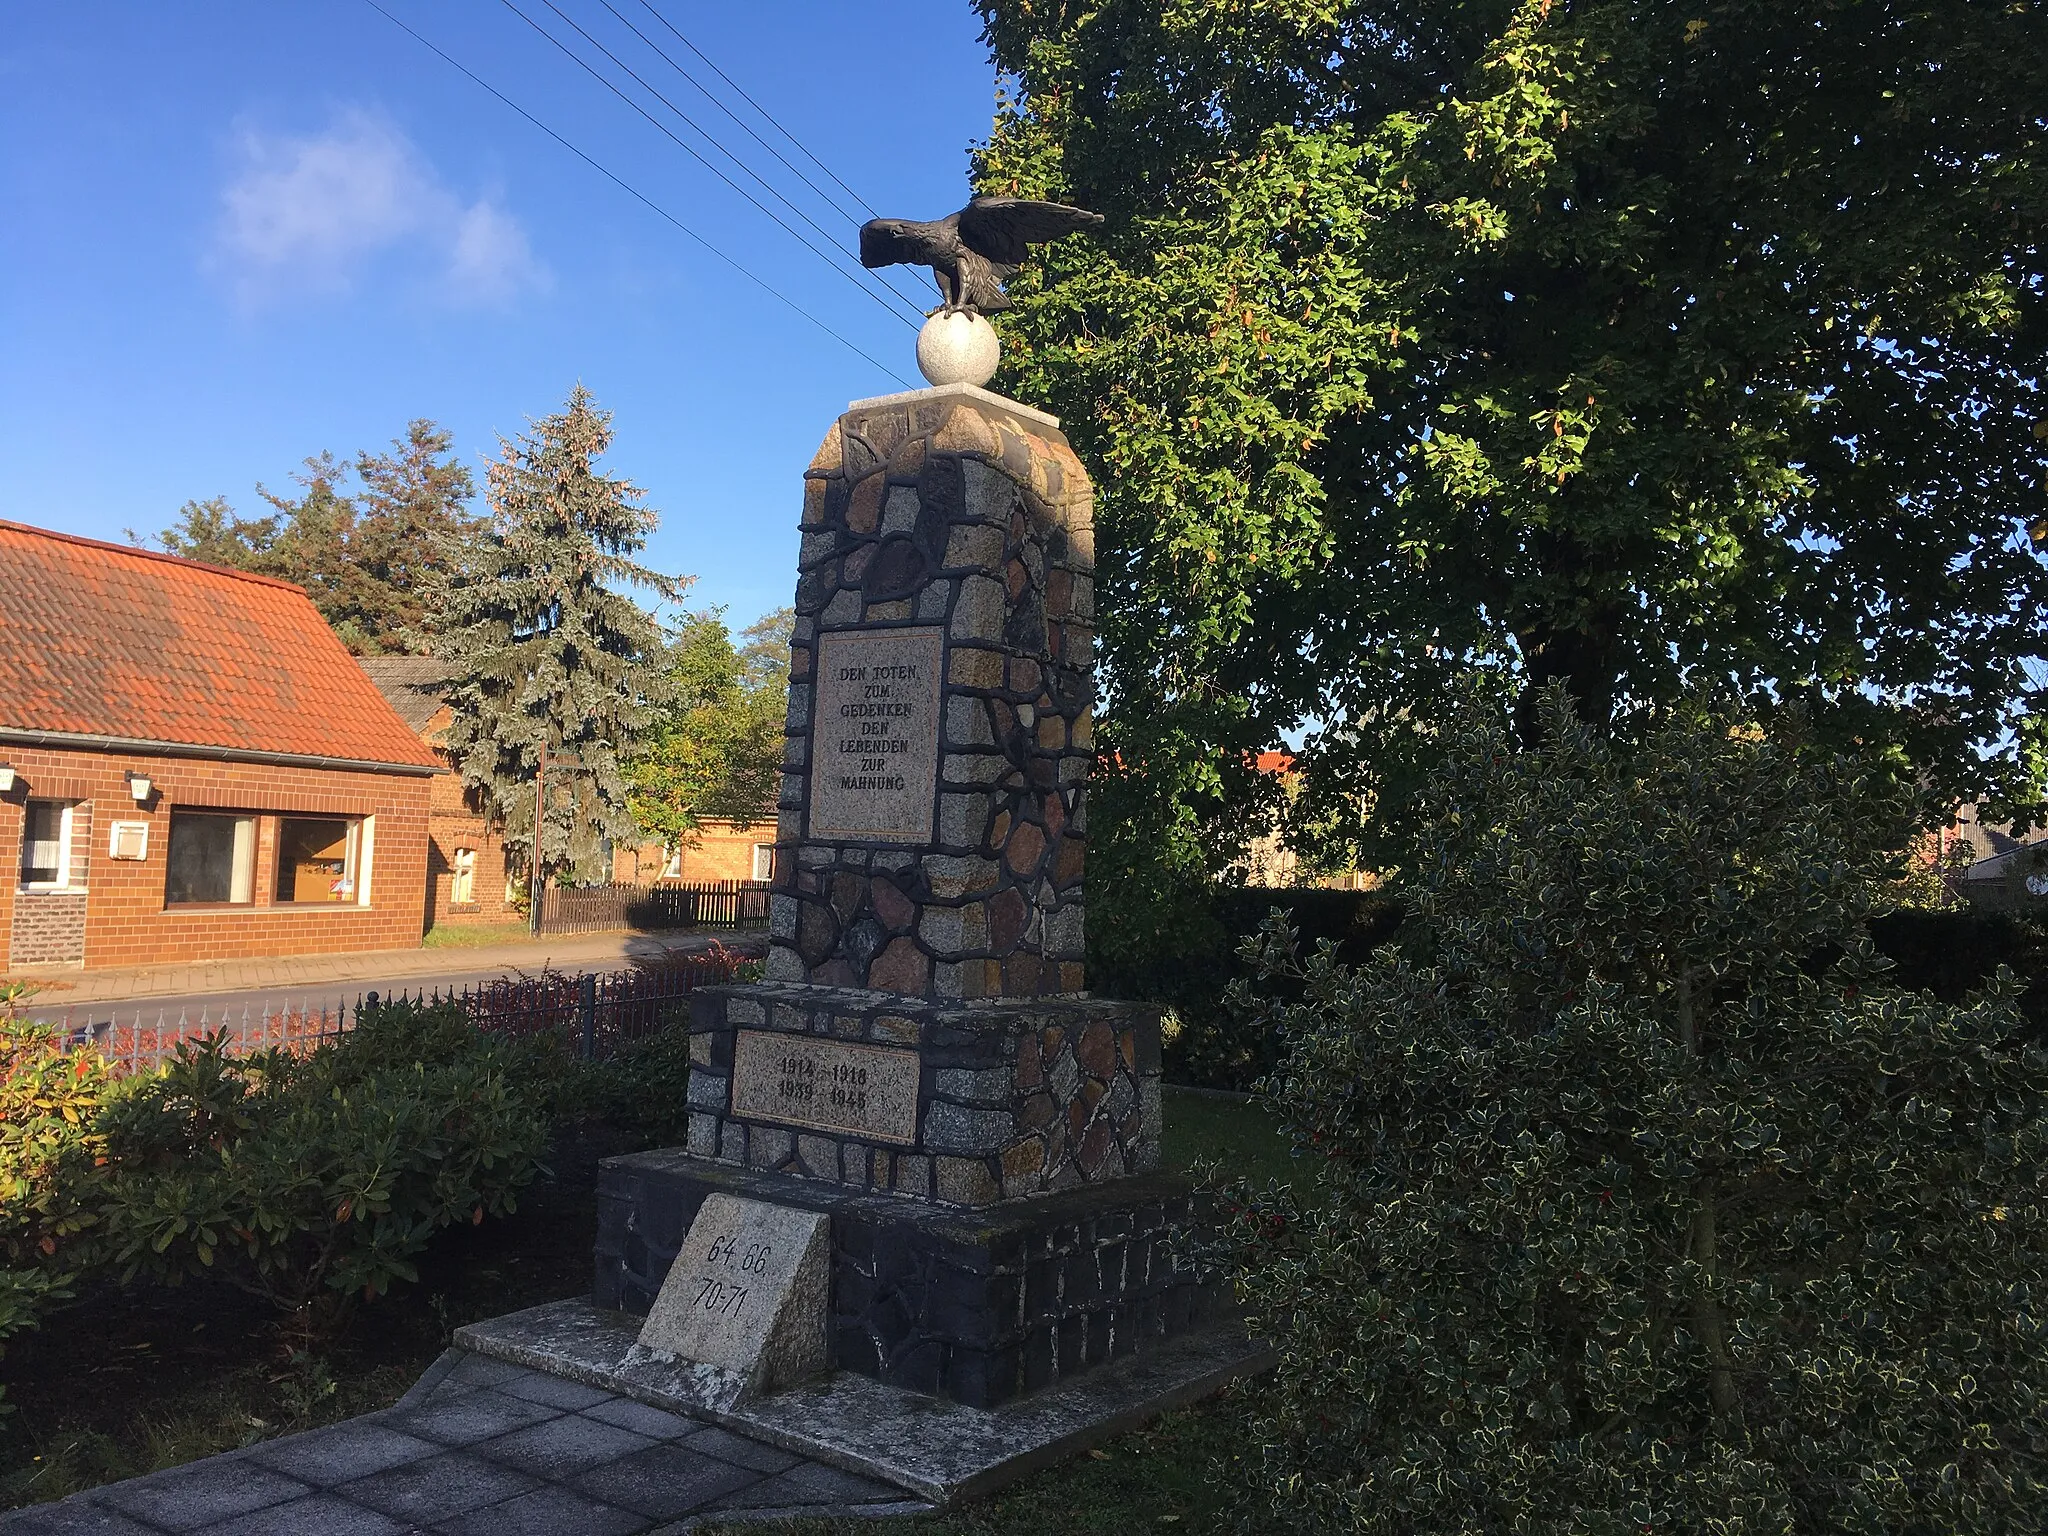 Photo showing: Memorial to the fallen soldiers in the German Unification Wars 1864, 1866, 1870/71, and of the World Wars 1914-1918 and 1939-45 in Groß Düben; locally historical significant; cultural heritage monument